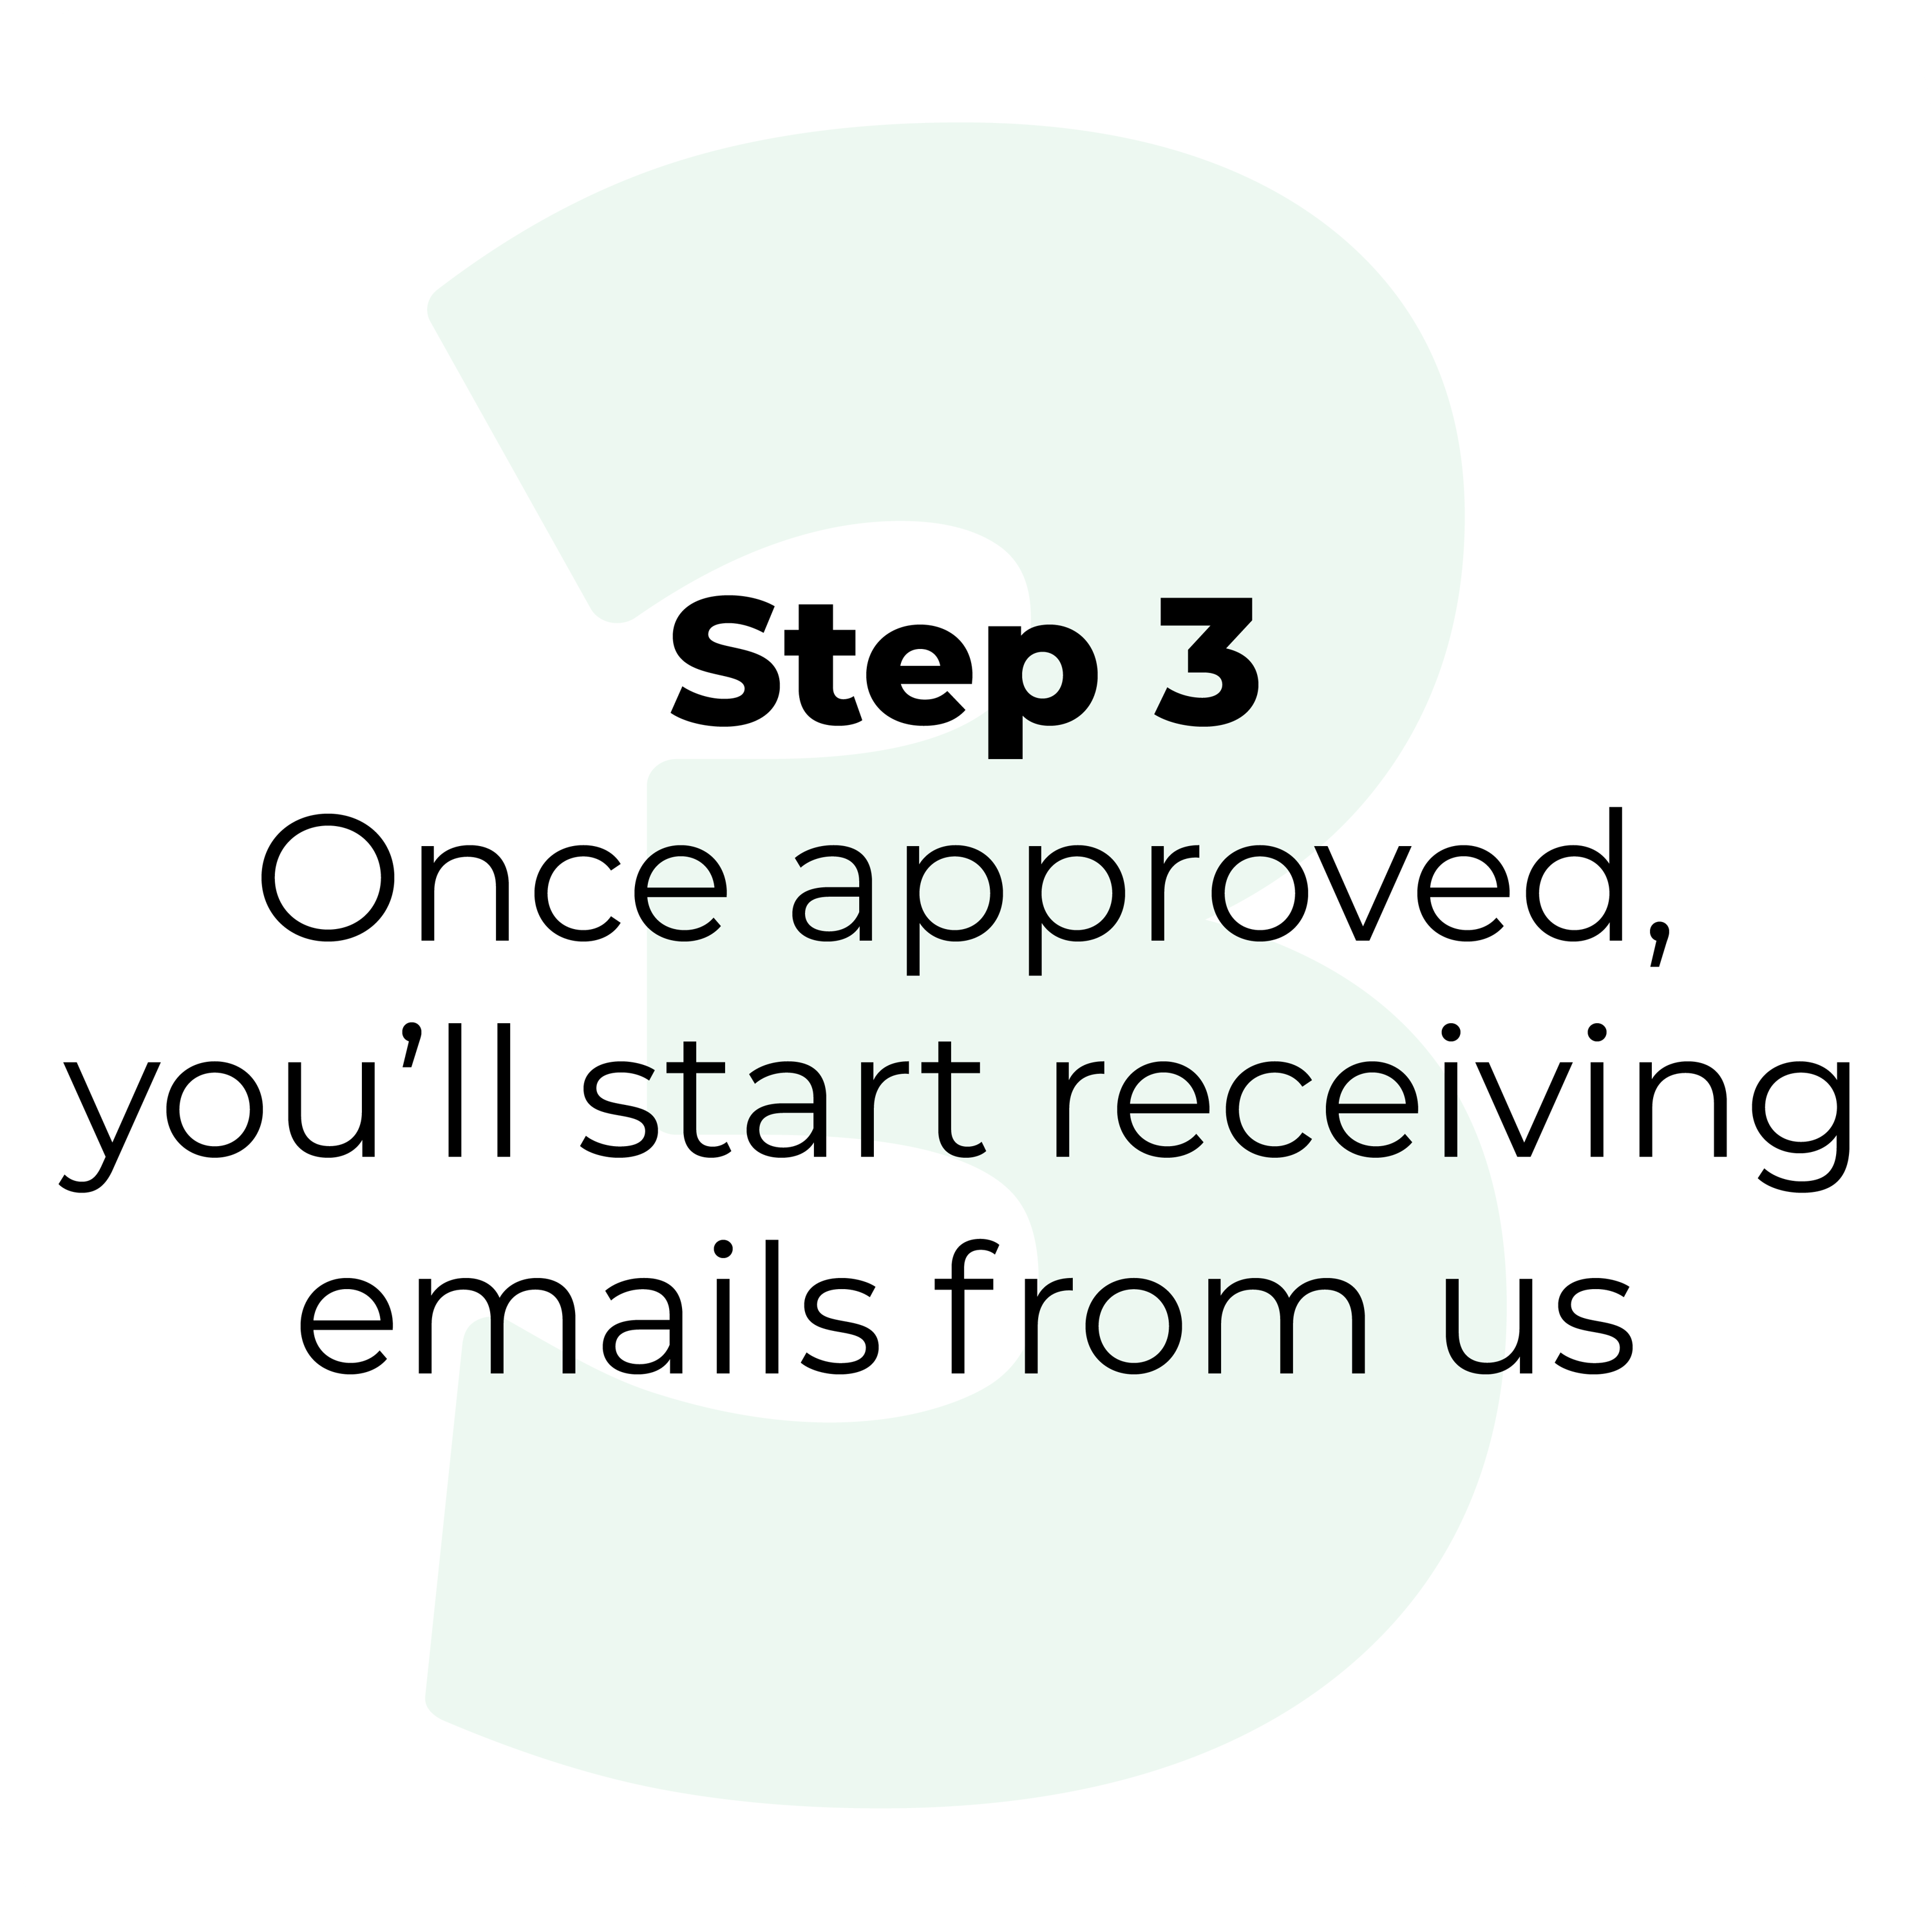 Step 3. Once approved you'll start receiving emails from us